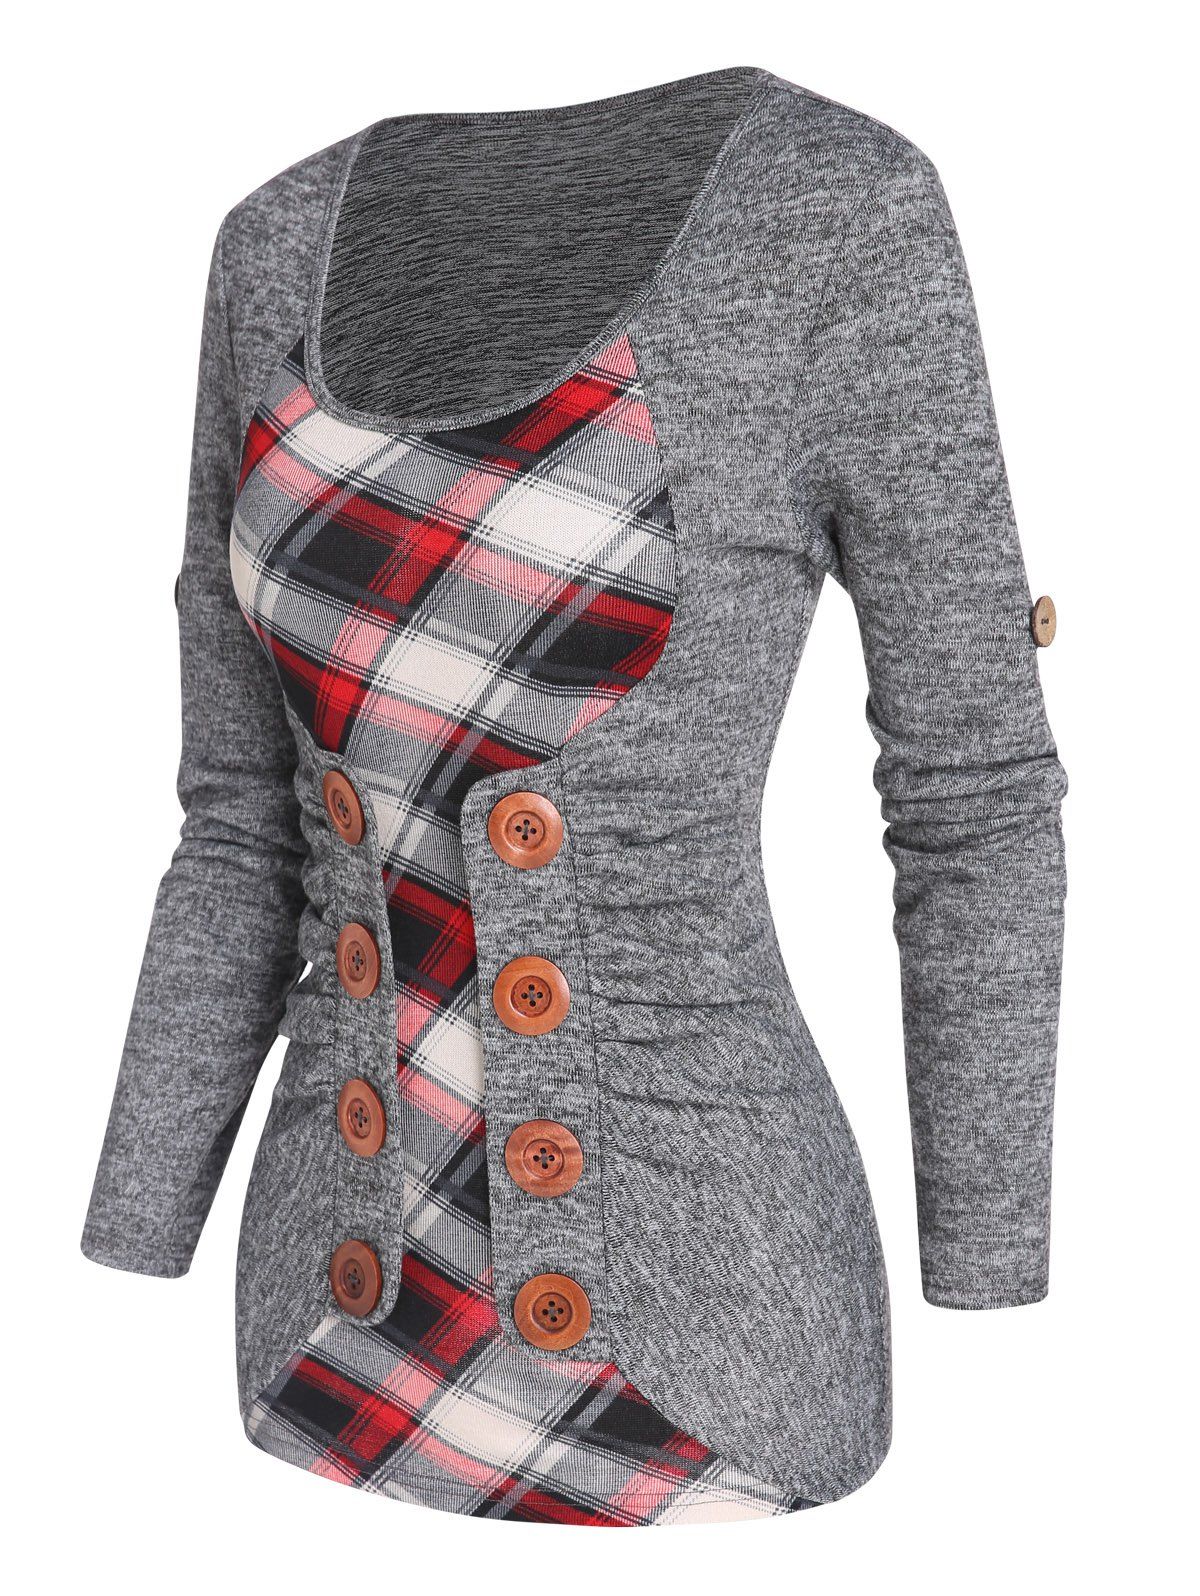 Women Plaid Print Knit Faux Twinset Top Mock Button Long Sleeve 2 In 1 Knitted Top Clothing Xxxl Gray